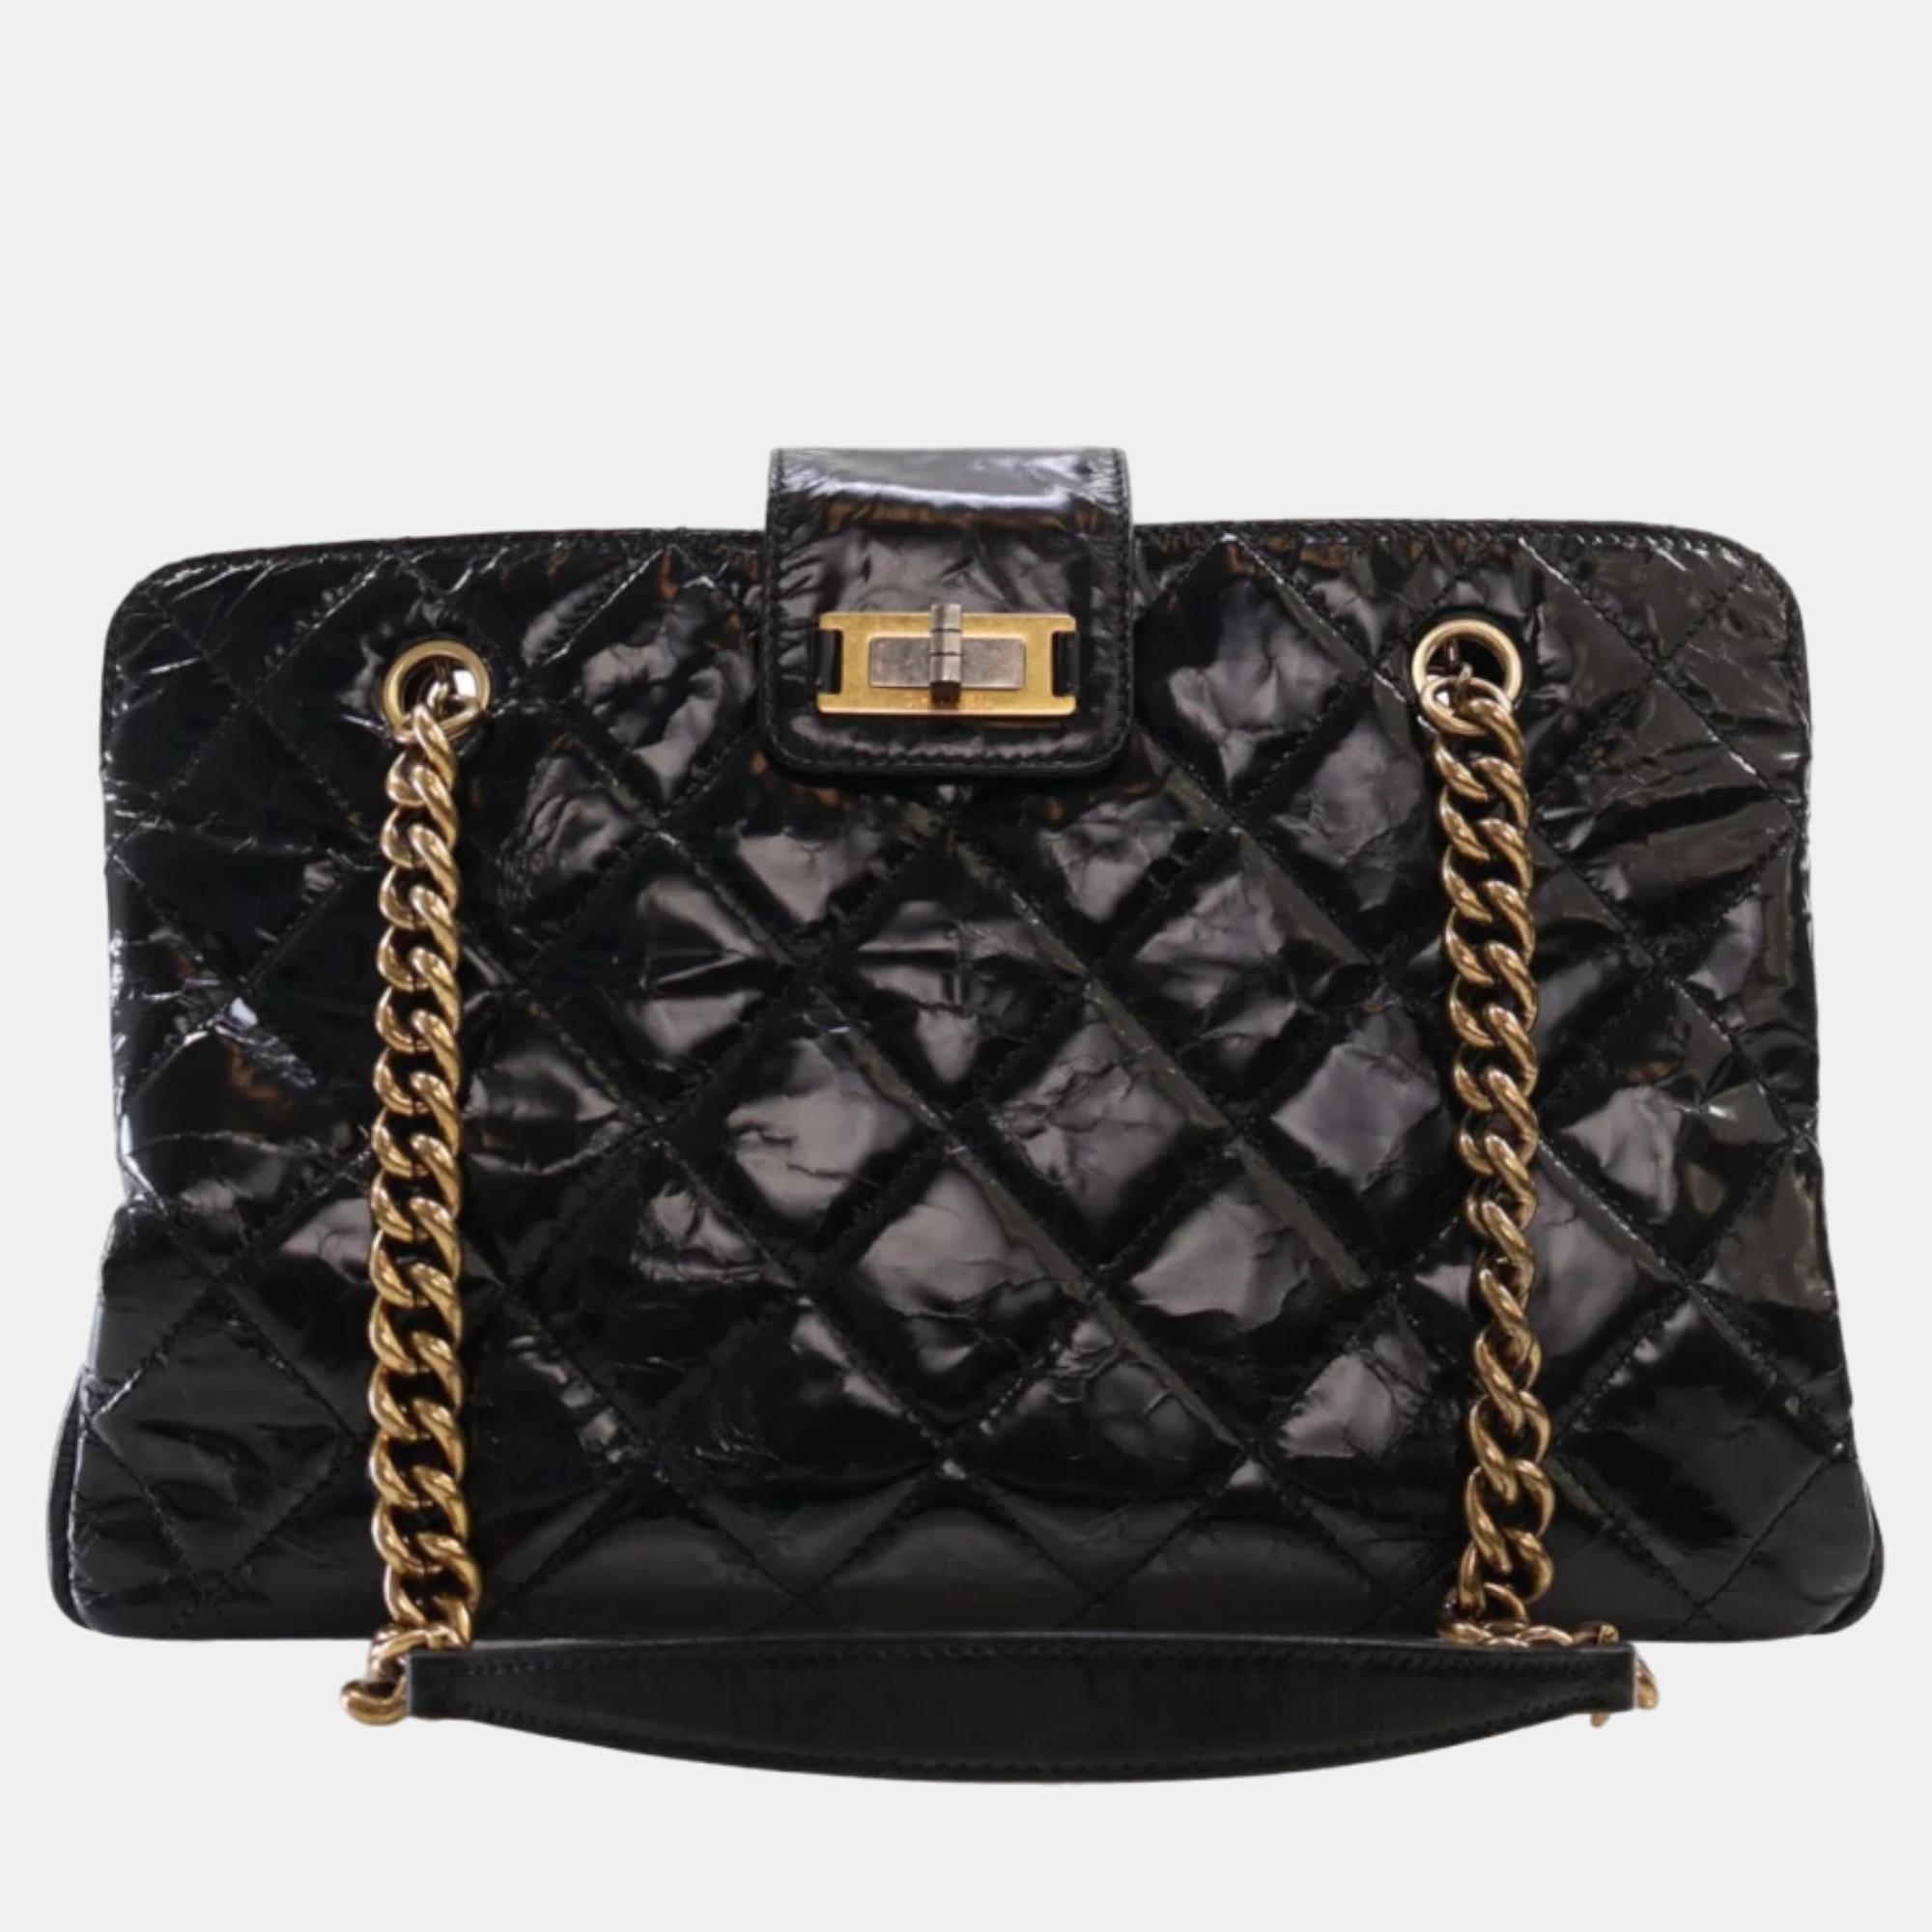 Chanel black crackled glazed quilted leather reissue chain tote